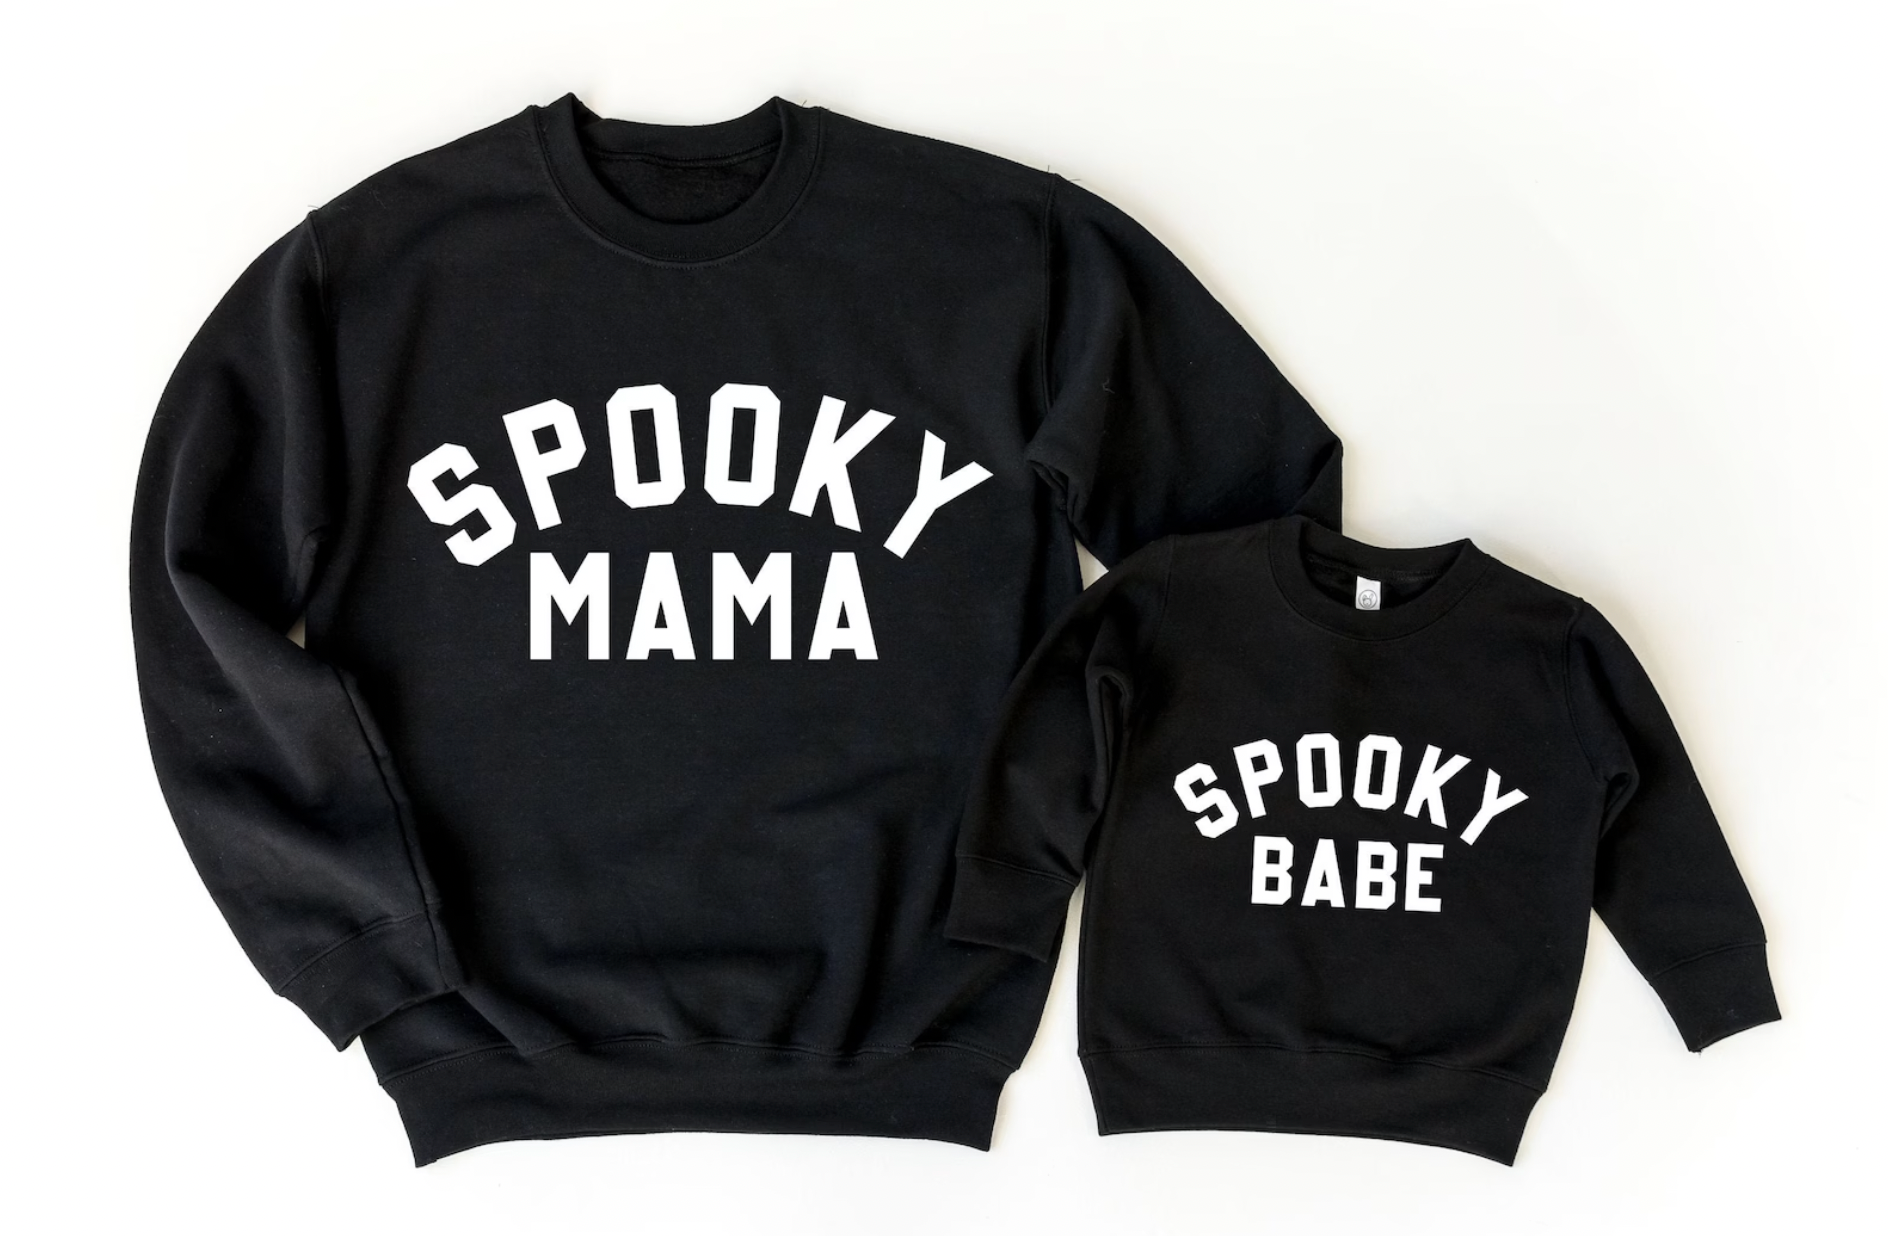 Spooky Mama Spooky Babe Mommy and Me Matching Black Halloween Crewnecks